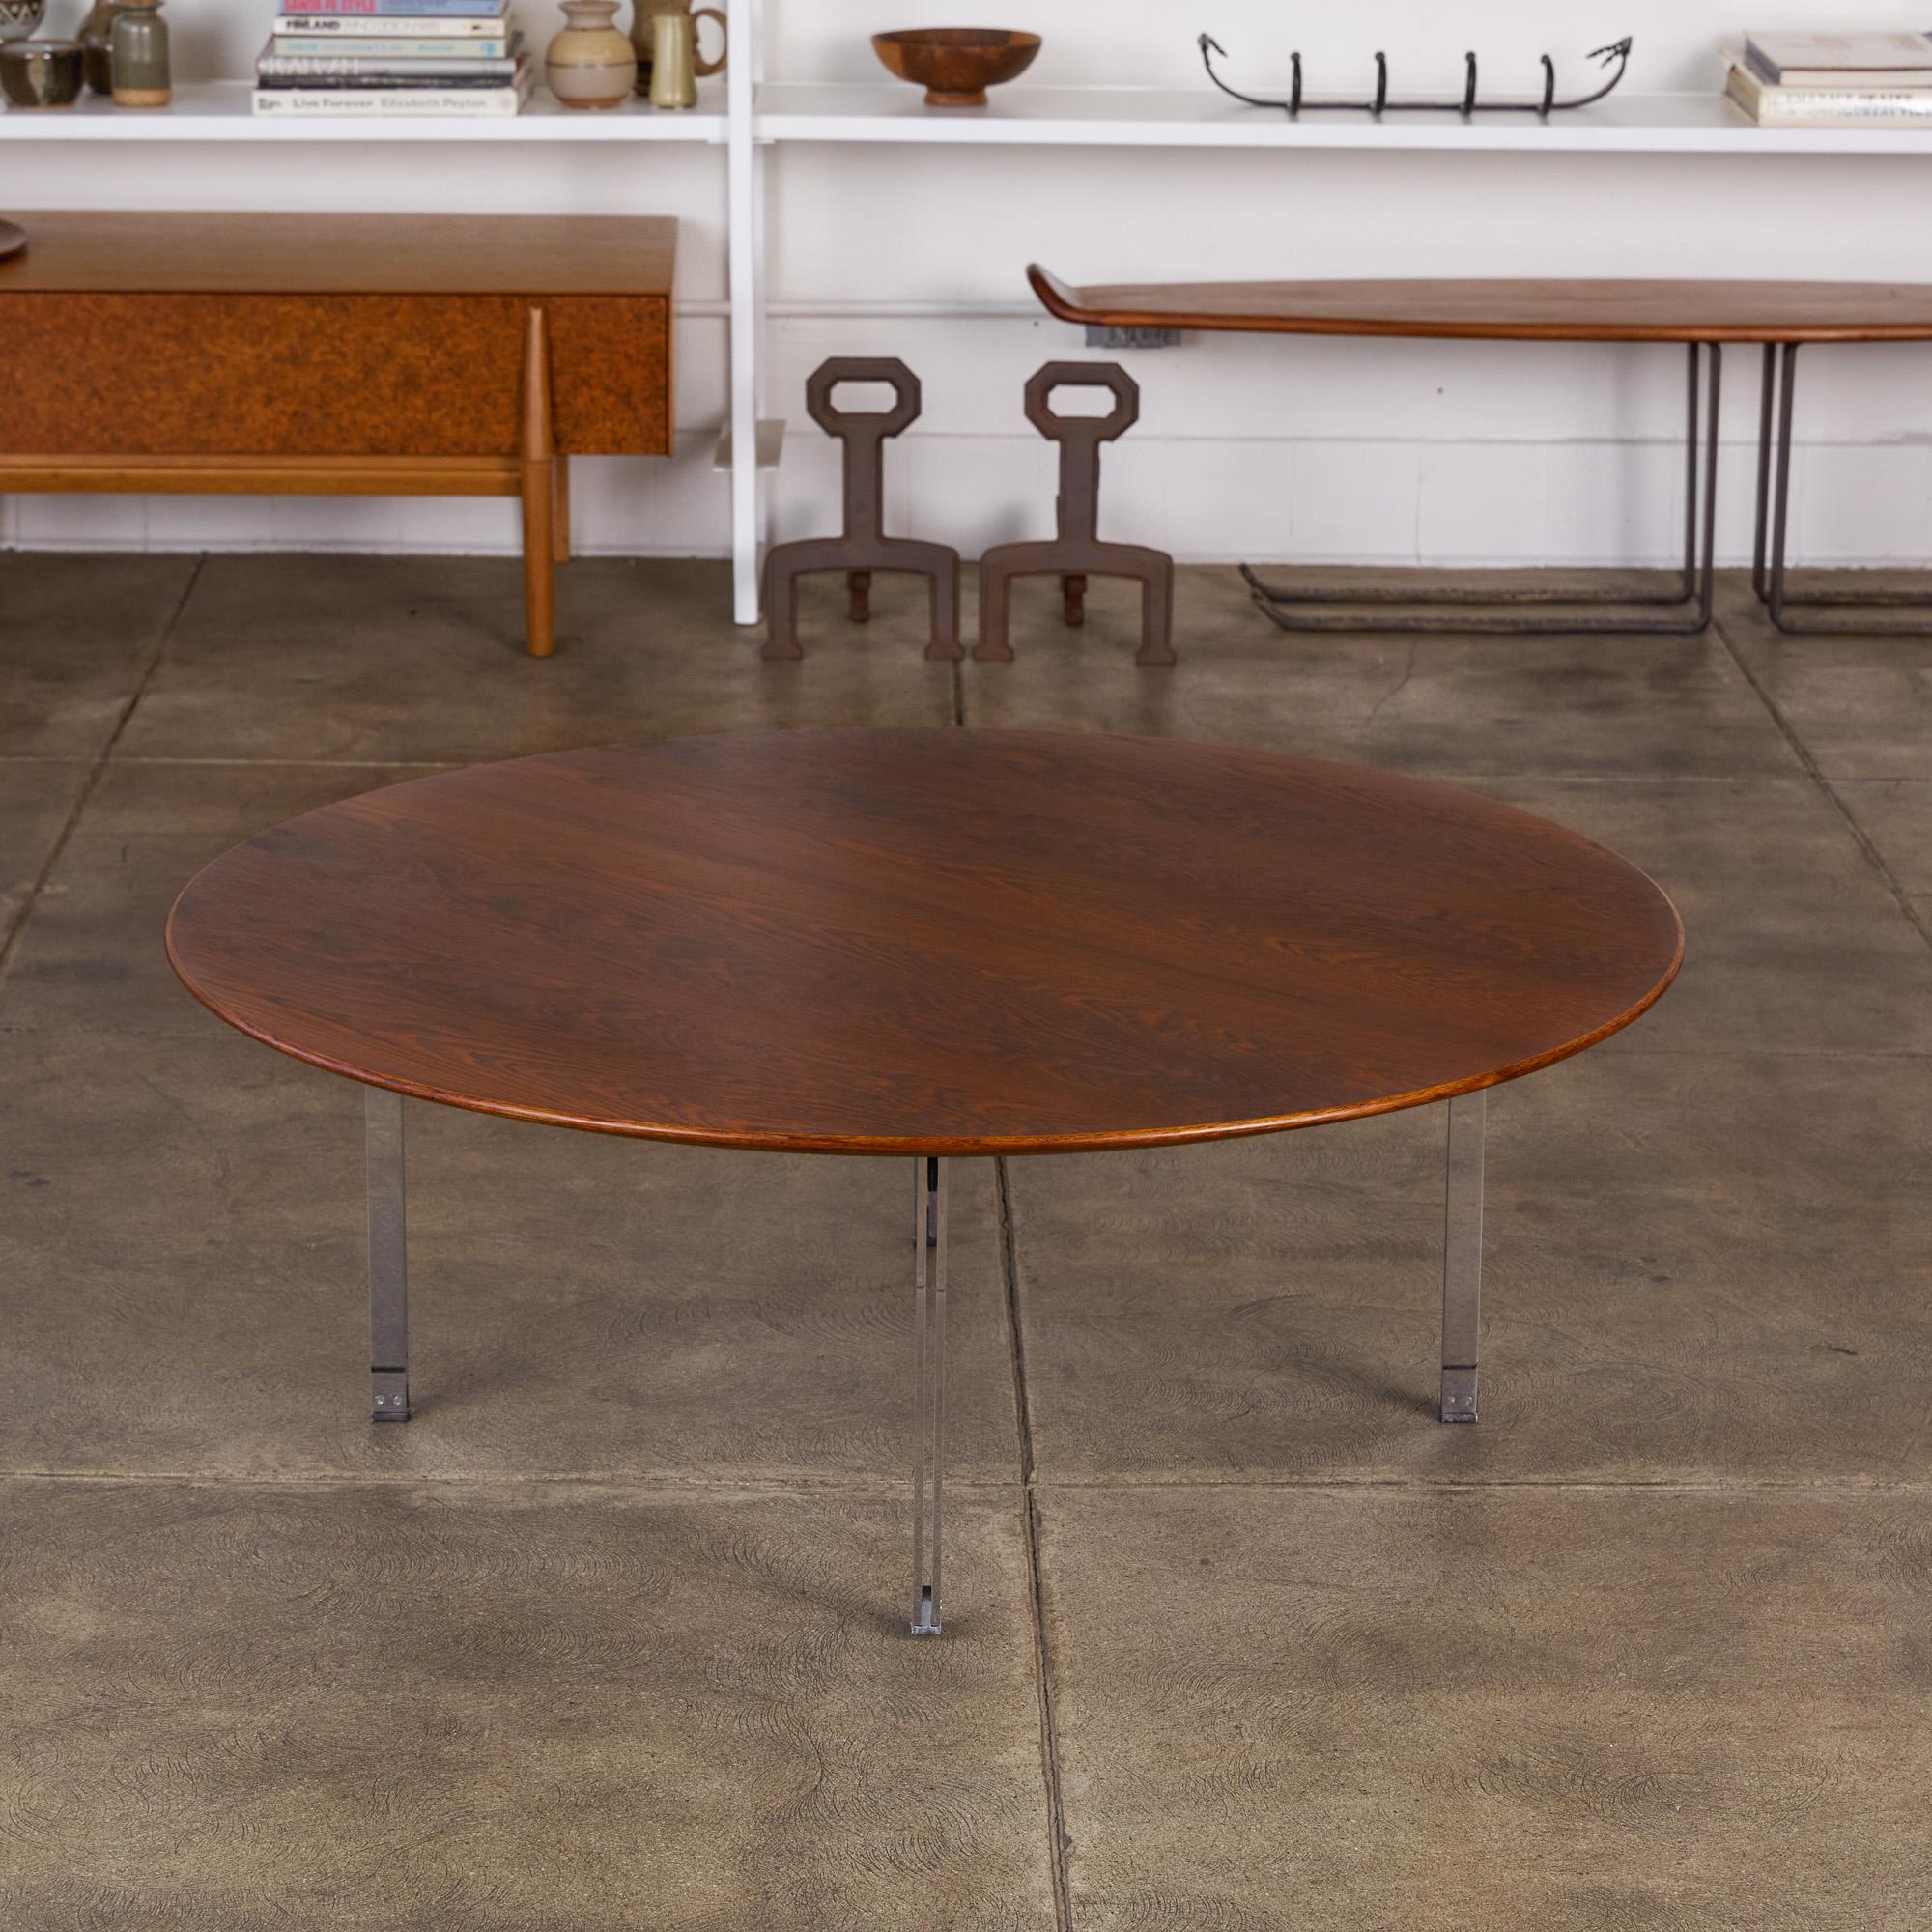 Part of Knoll’s iconic Parallel Bar series, designed by Florence Knoll. Produced from 1955-1968, this model 404 round coffee table, features richly coloured and figured rosewood veneer. Double steel brushed chrome legs (hence its name) complete the